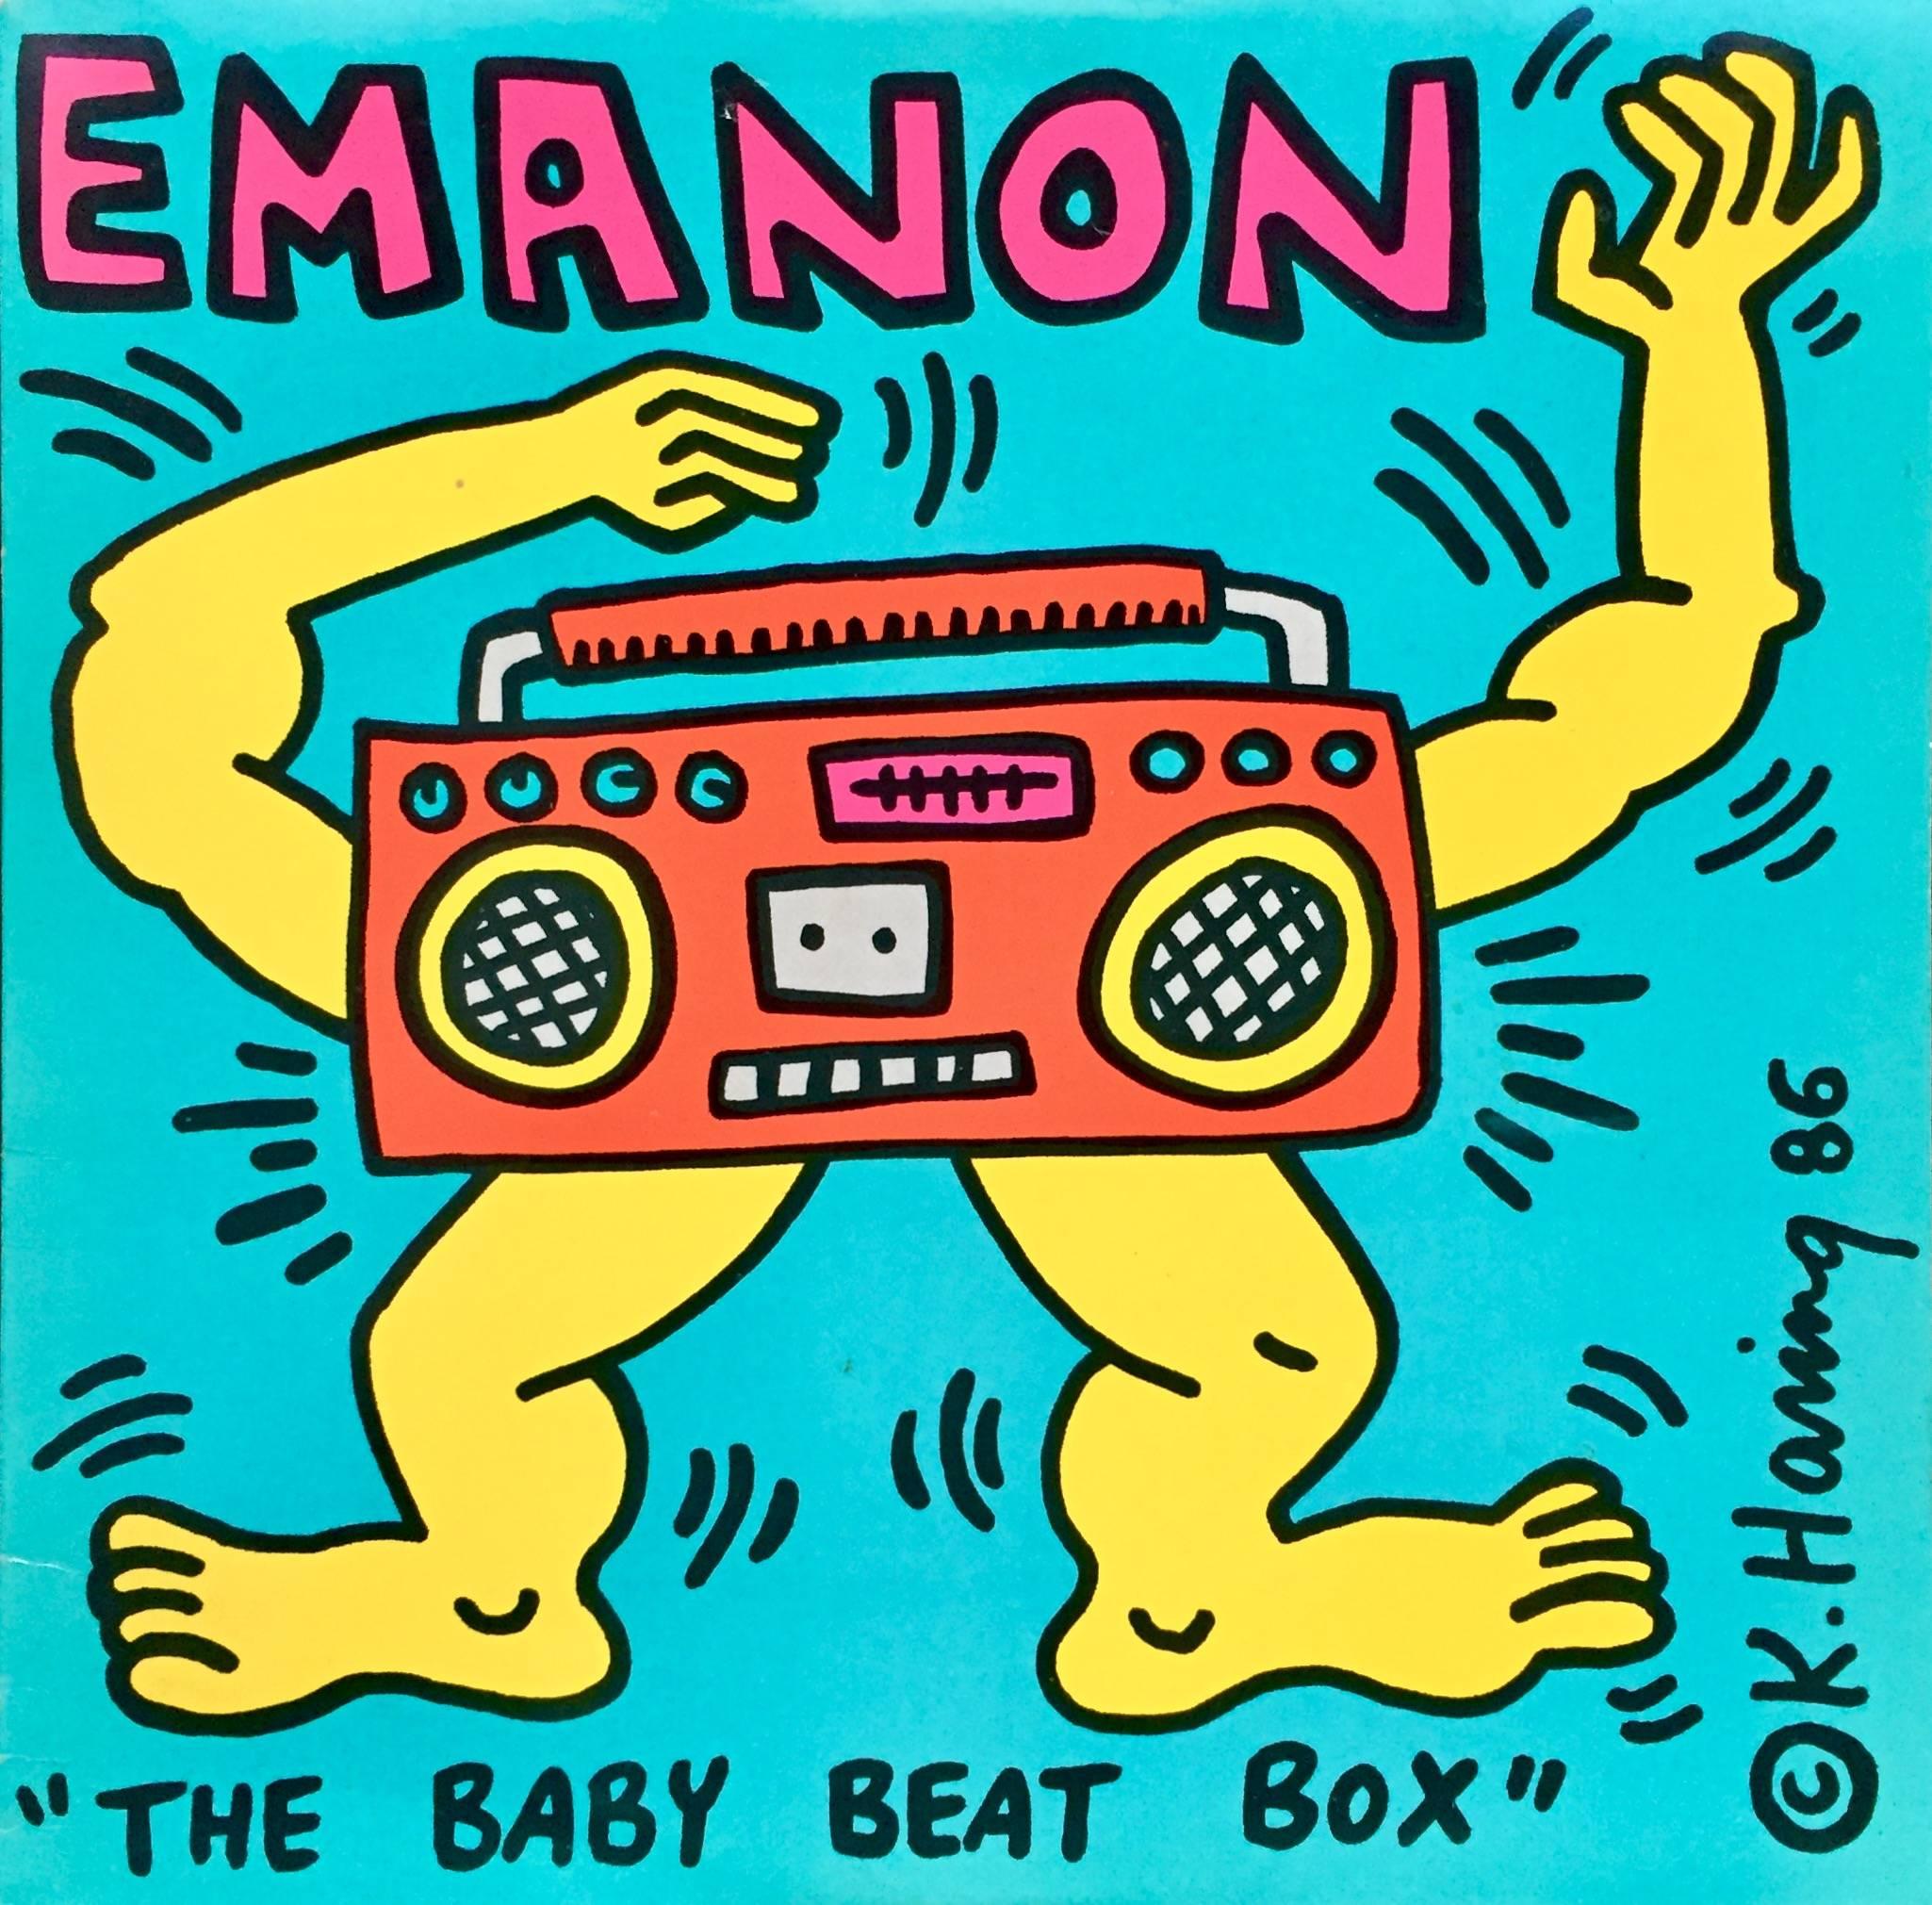 Keith Haring 'The Baby Beat Box,' 
A rare highly sought after vinyl art cover featuring original artwork by Keith Haring. Truly vibrant colors that make for stand-out wall art. looks very cool framed.

Off-Set Lithograph on vinyl record jacket,